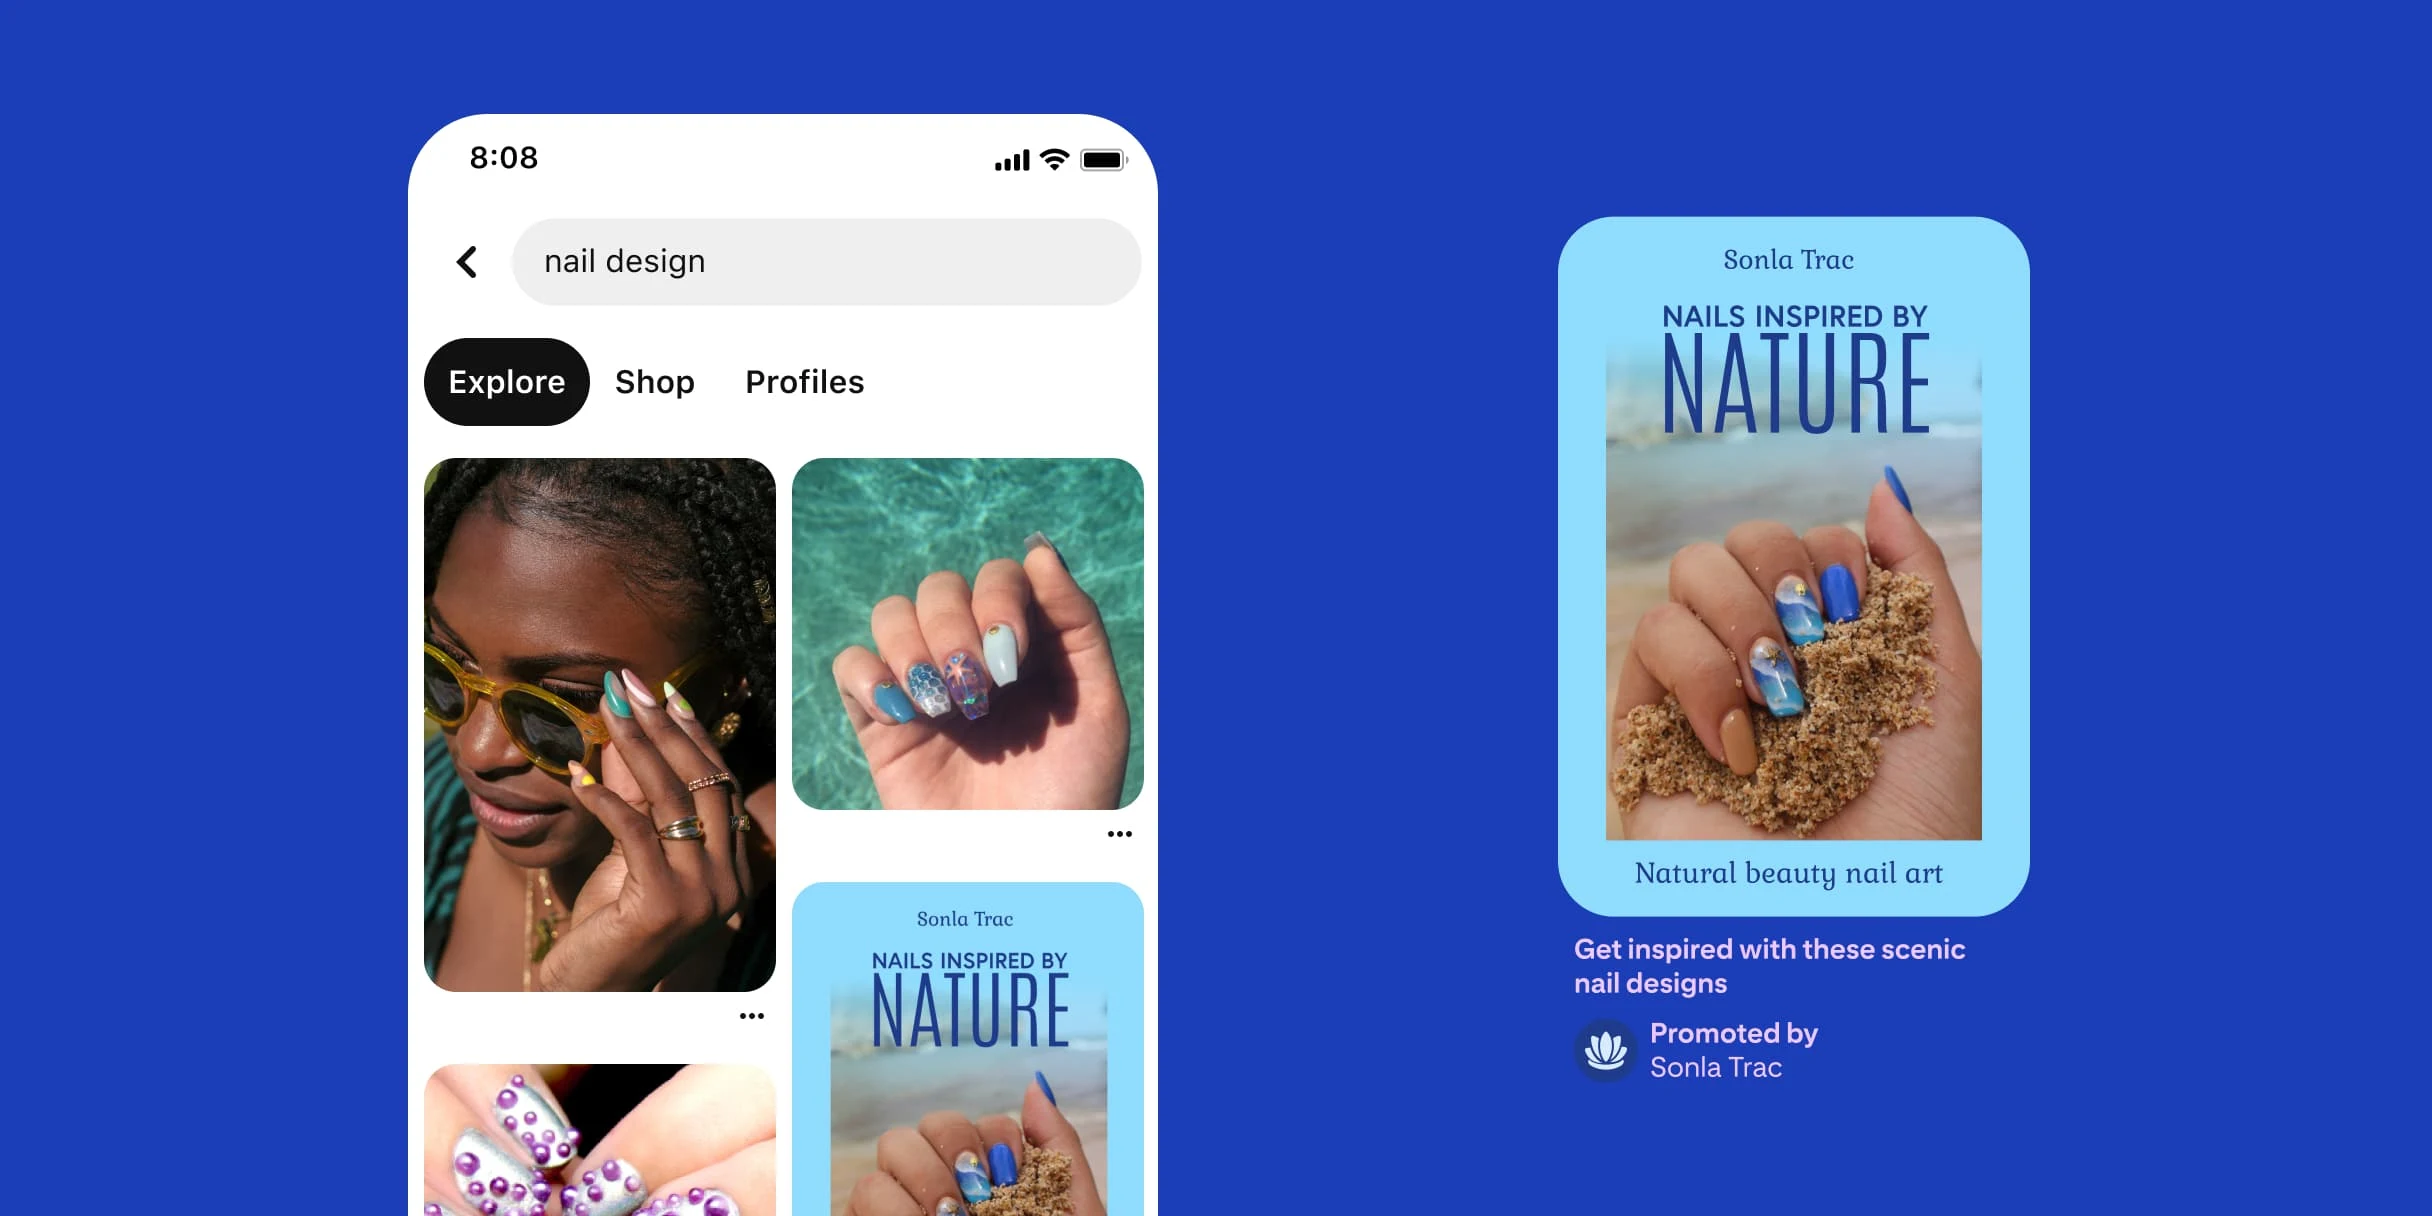 Pinterest search term for nail designs. A Black woman is holding the frame of her sunglasses, with pastel shapes on her long nails. A hand with long nails patterned with sea-inspired designs is over a pool background. A hand with short nails with silver nail varnish and purple 3D dots. A Pin showcasing a hand on the beach holding sand. The hand has long nails with a beachy design. The text reads, ‘Nails inspired by nature – Natural beauty nail art’. The description underneath reads, ‘Get inspired by these scenic nail designs’. 